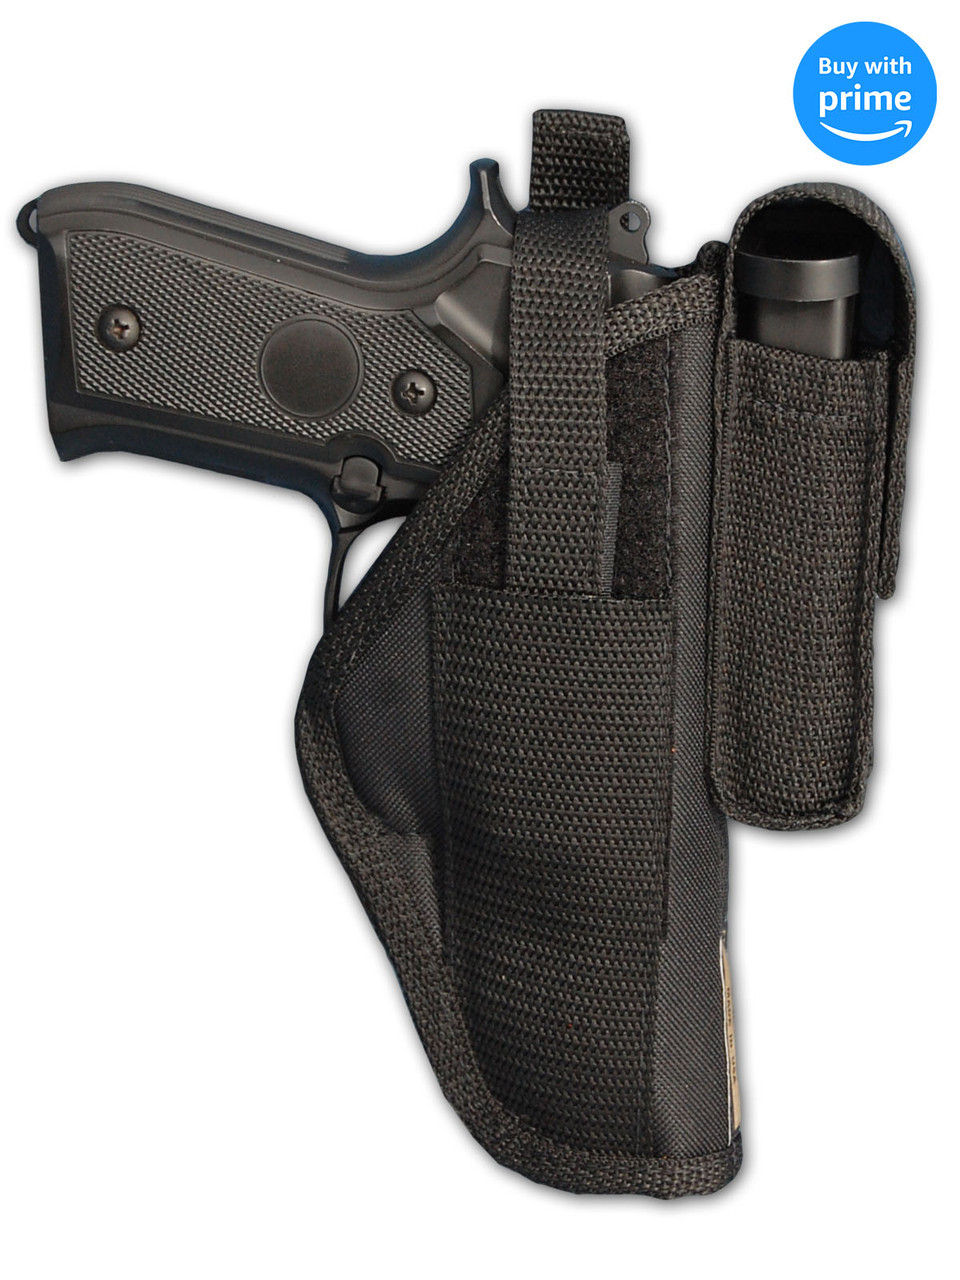 OWB Belt Clip Holster with Magazine Pouch for CZ 75 75B 83 85 85B right